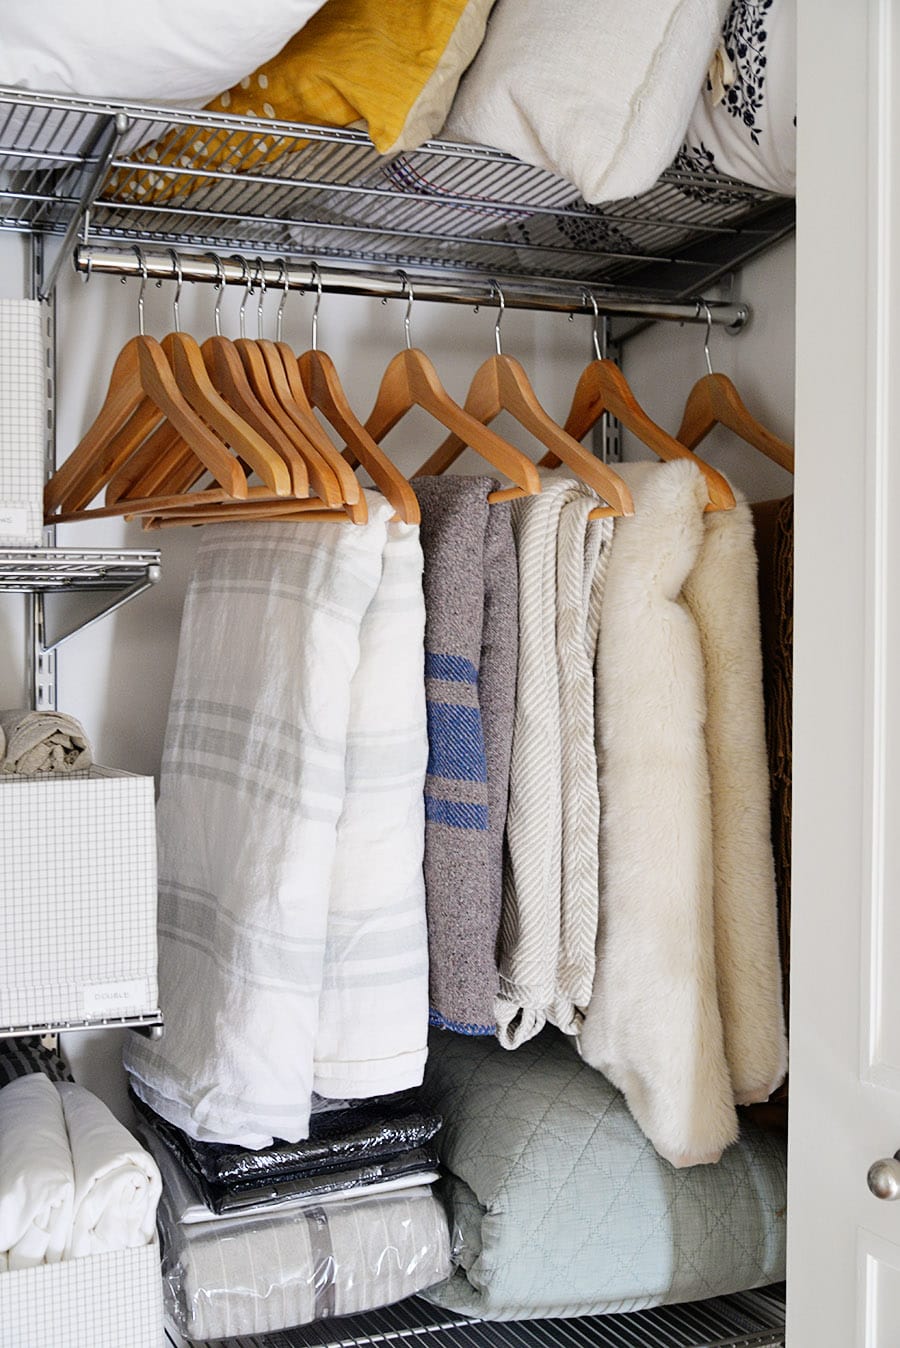 comforters and duvets hung on hangers inside a closet